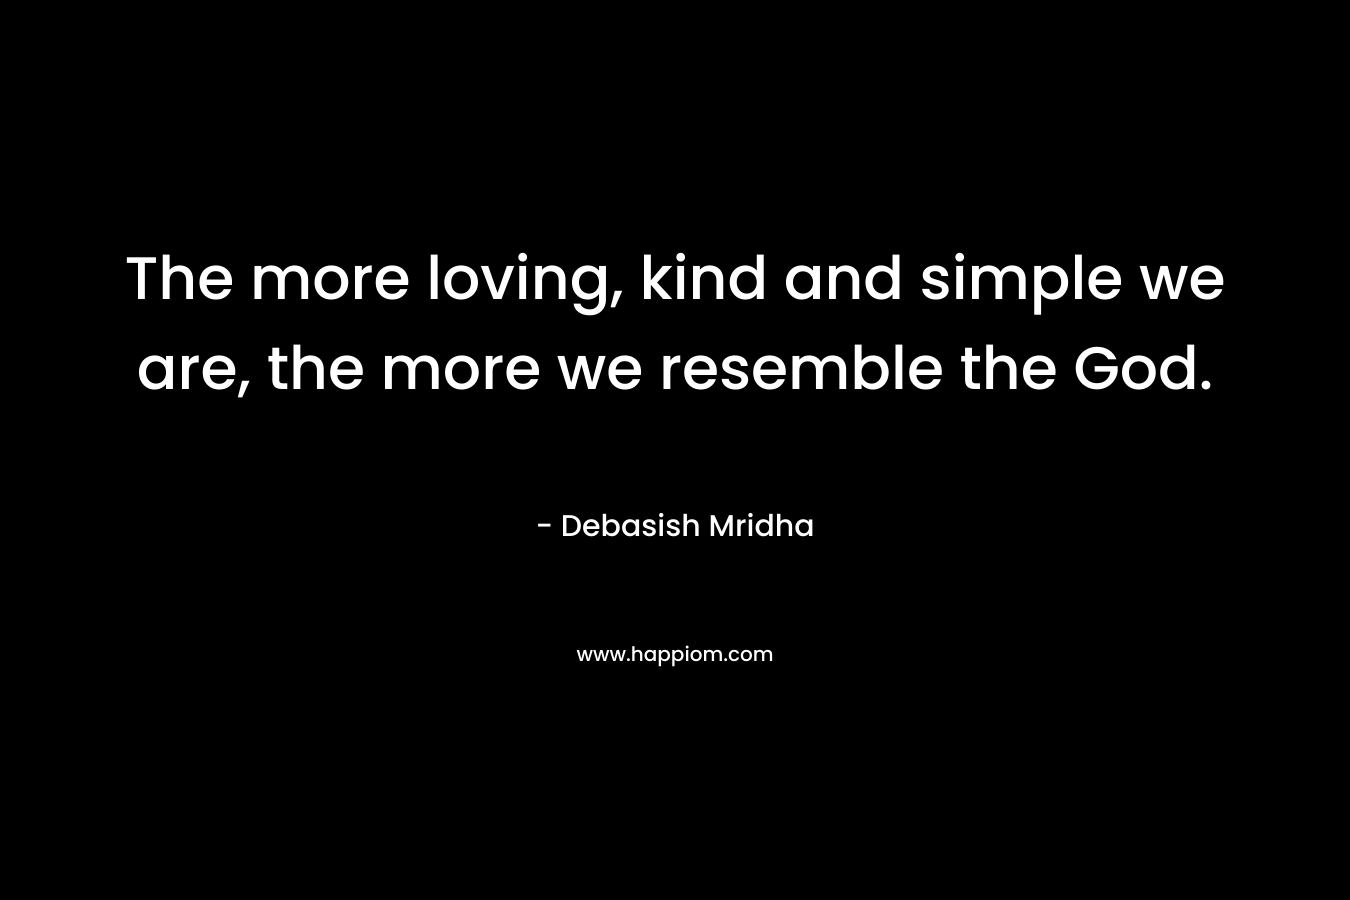 The more loving, kind and simple we are, the more we resemble the God. – Debasish Mridha